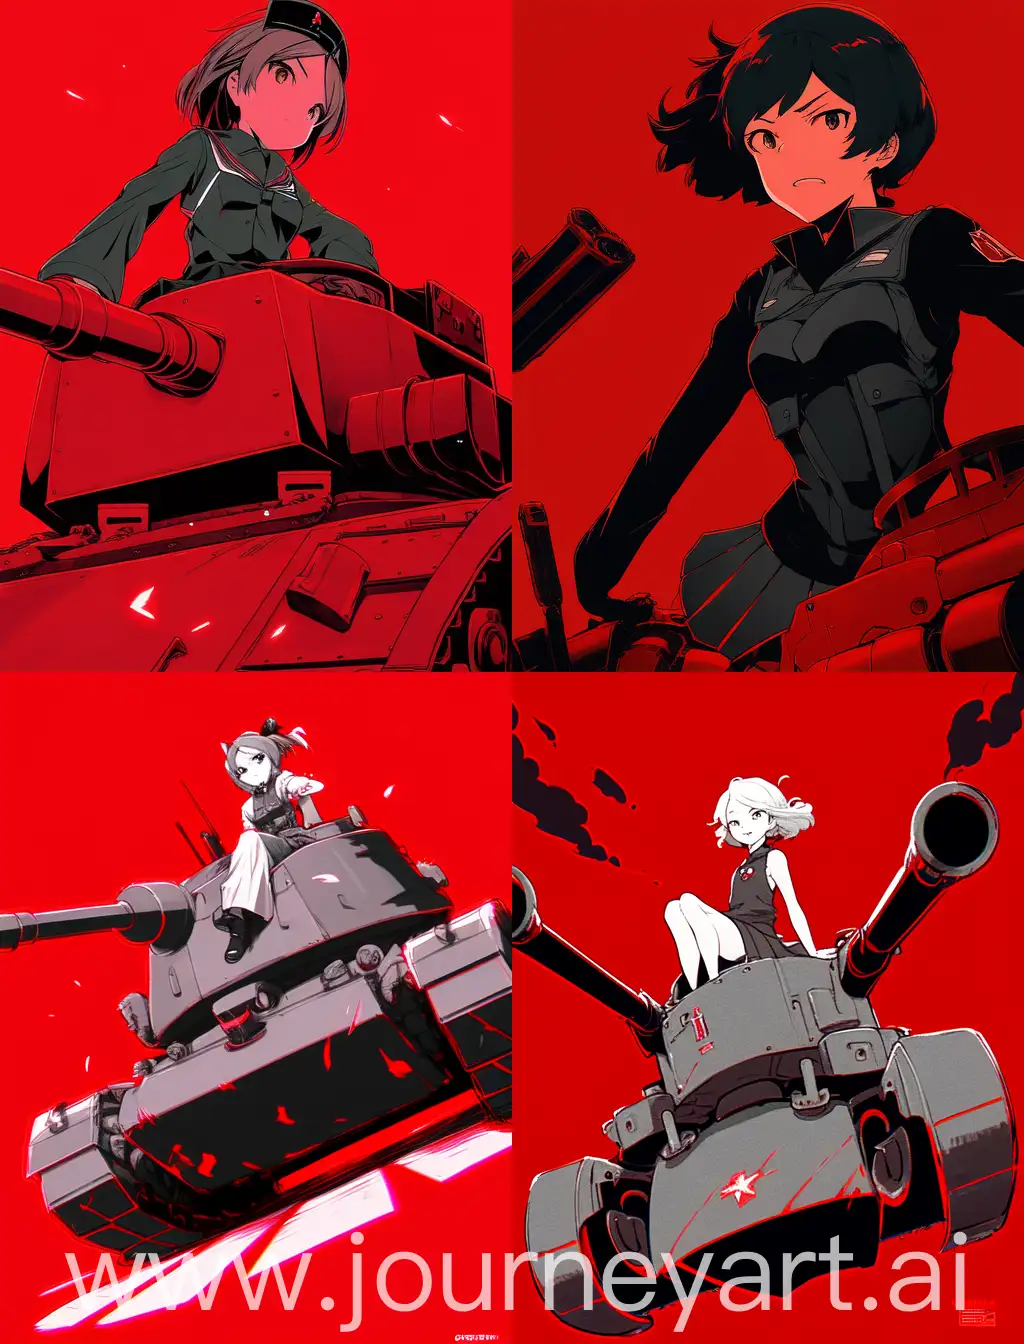 anime girl, on top of a tank, red solid background, full color art, cartoon anime style, strong outer line